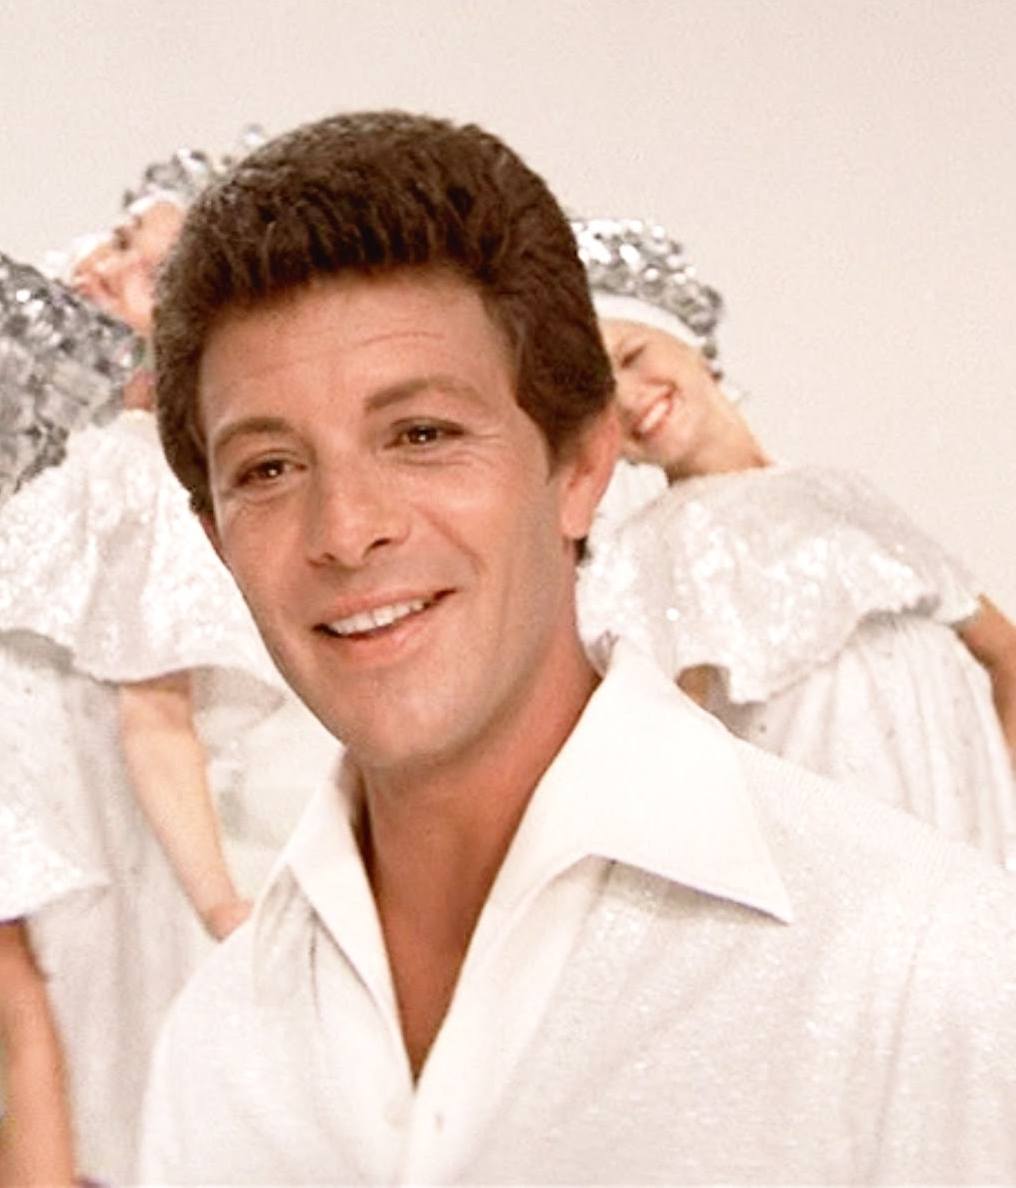 Frankie Avalon as Teen Angel in Grease